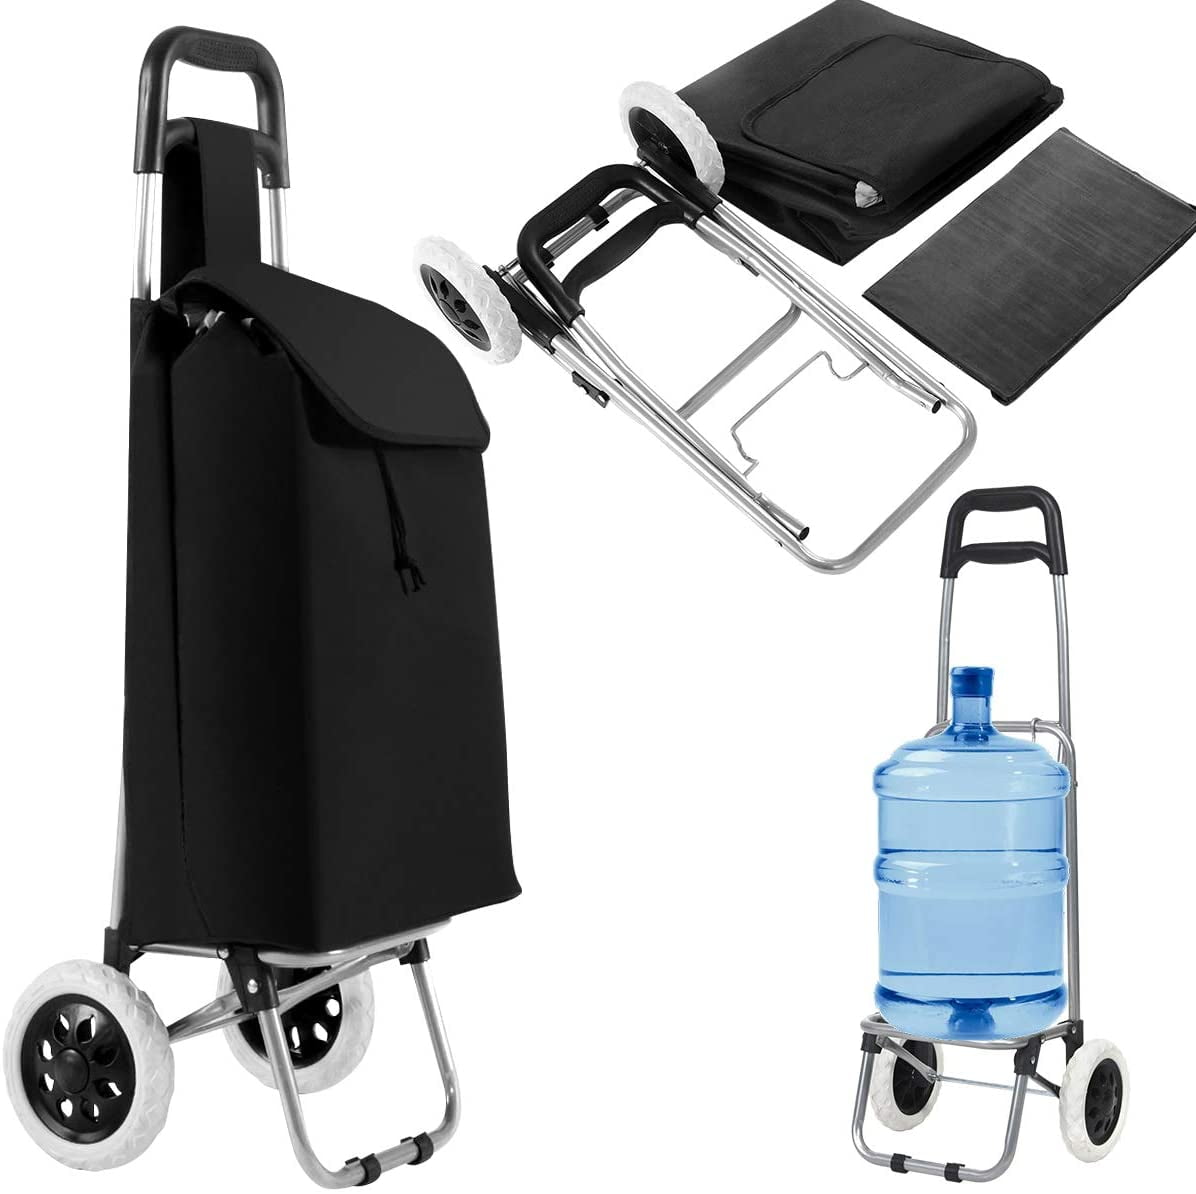 Members Lightweight 2 Wheel Large Shopping Trolley Shopping Cart Foldable Grocery Bag Black 